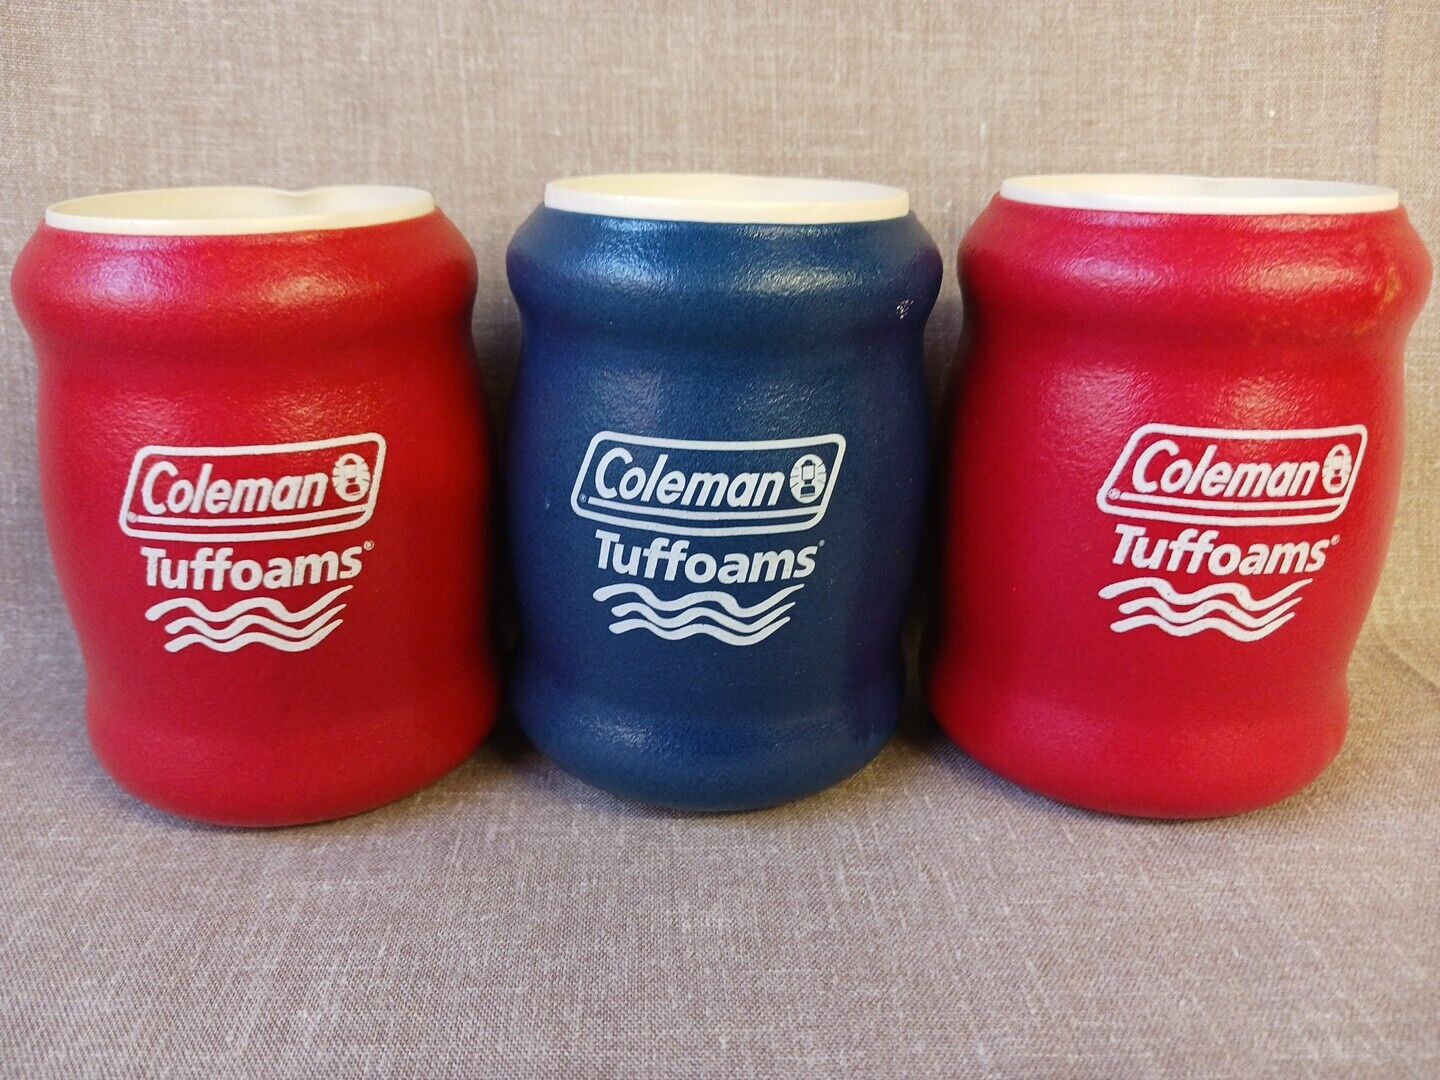 Vtg Coleman Tuffoams Foam Insulated Beer Can Coozie Koozie Lot of 3 Red USA Made